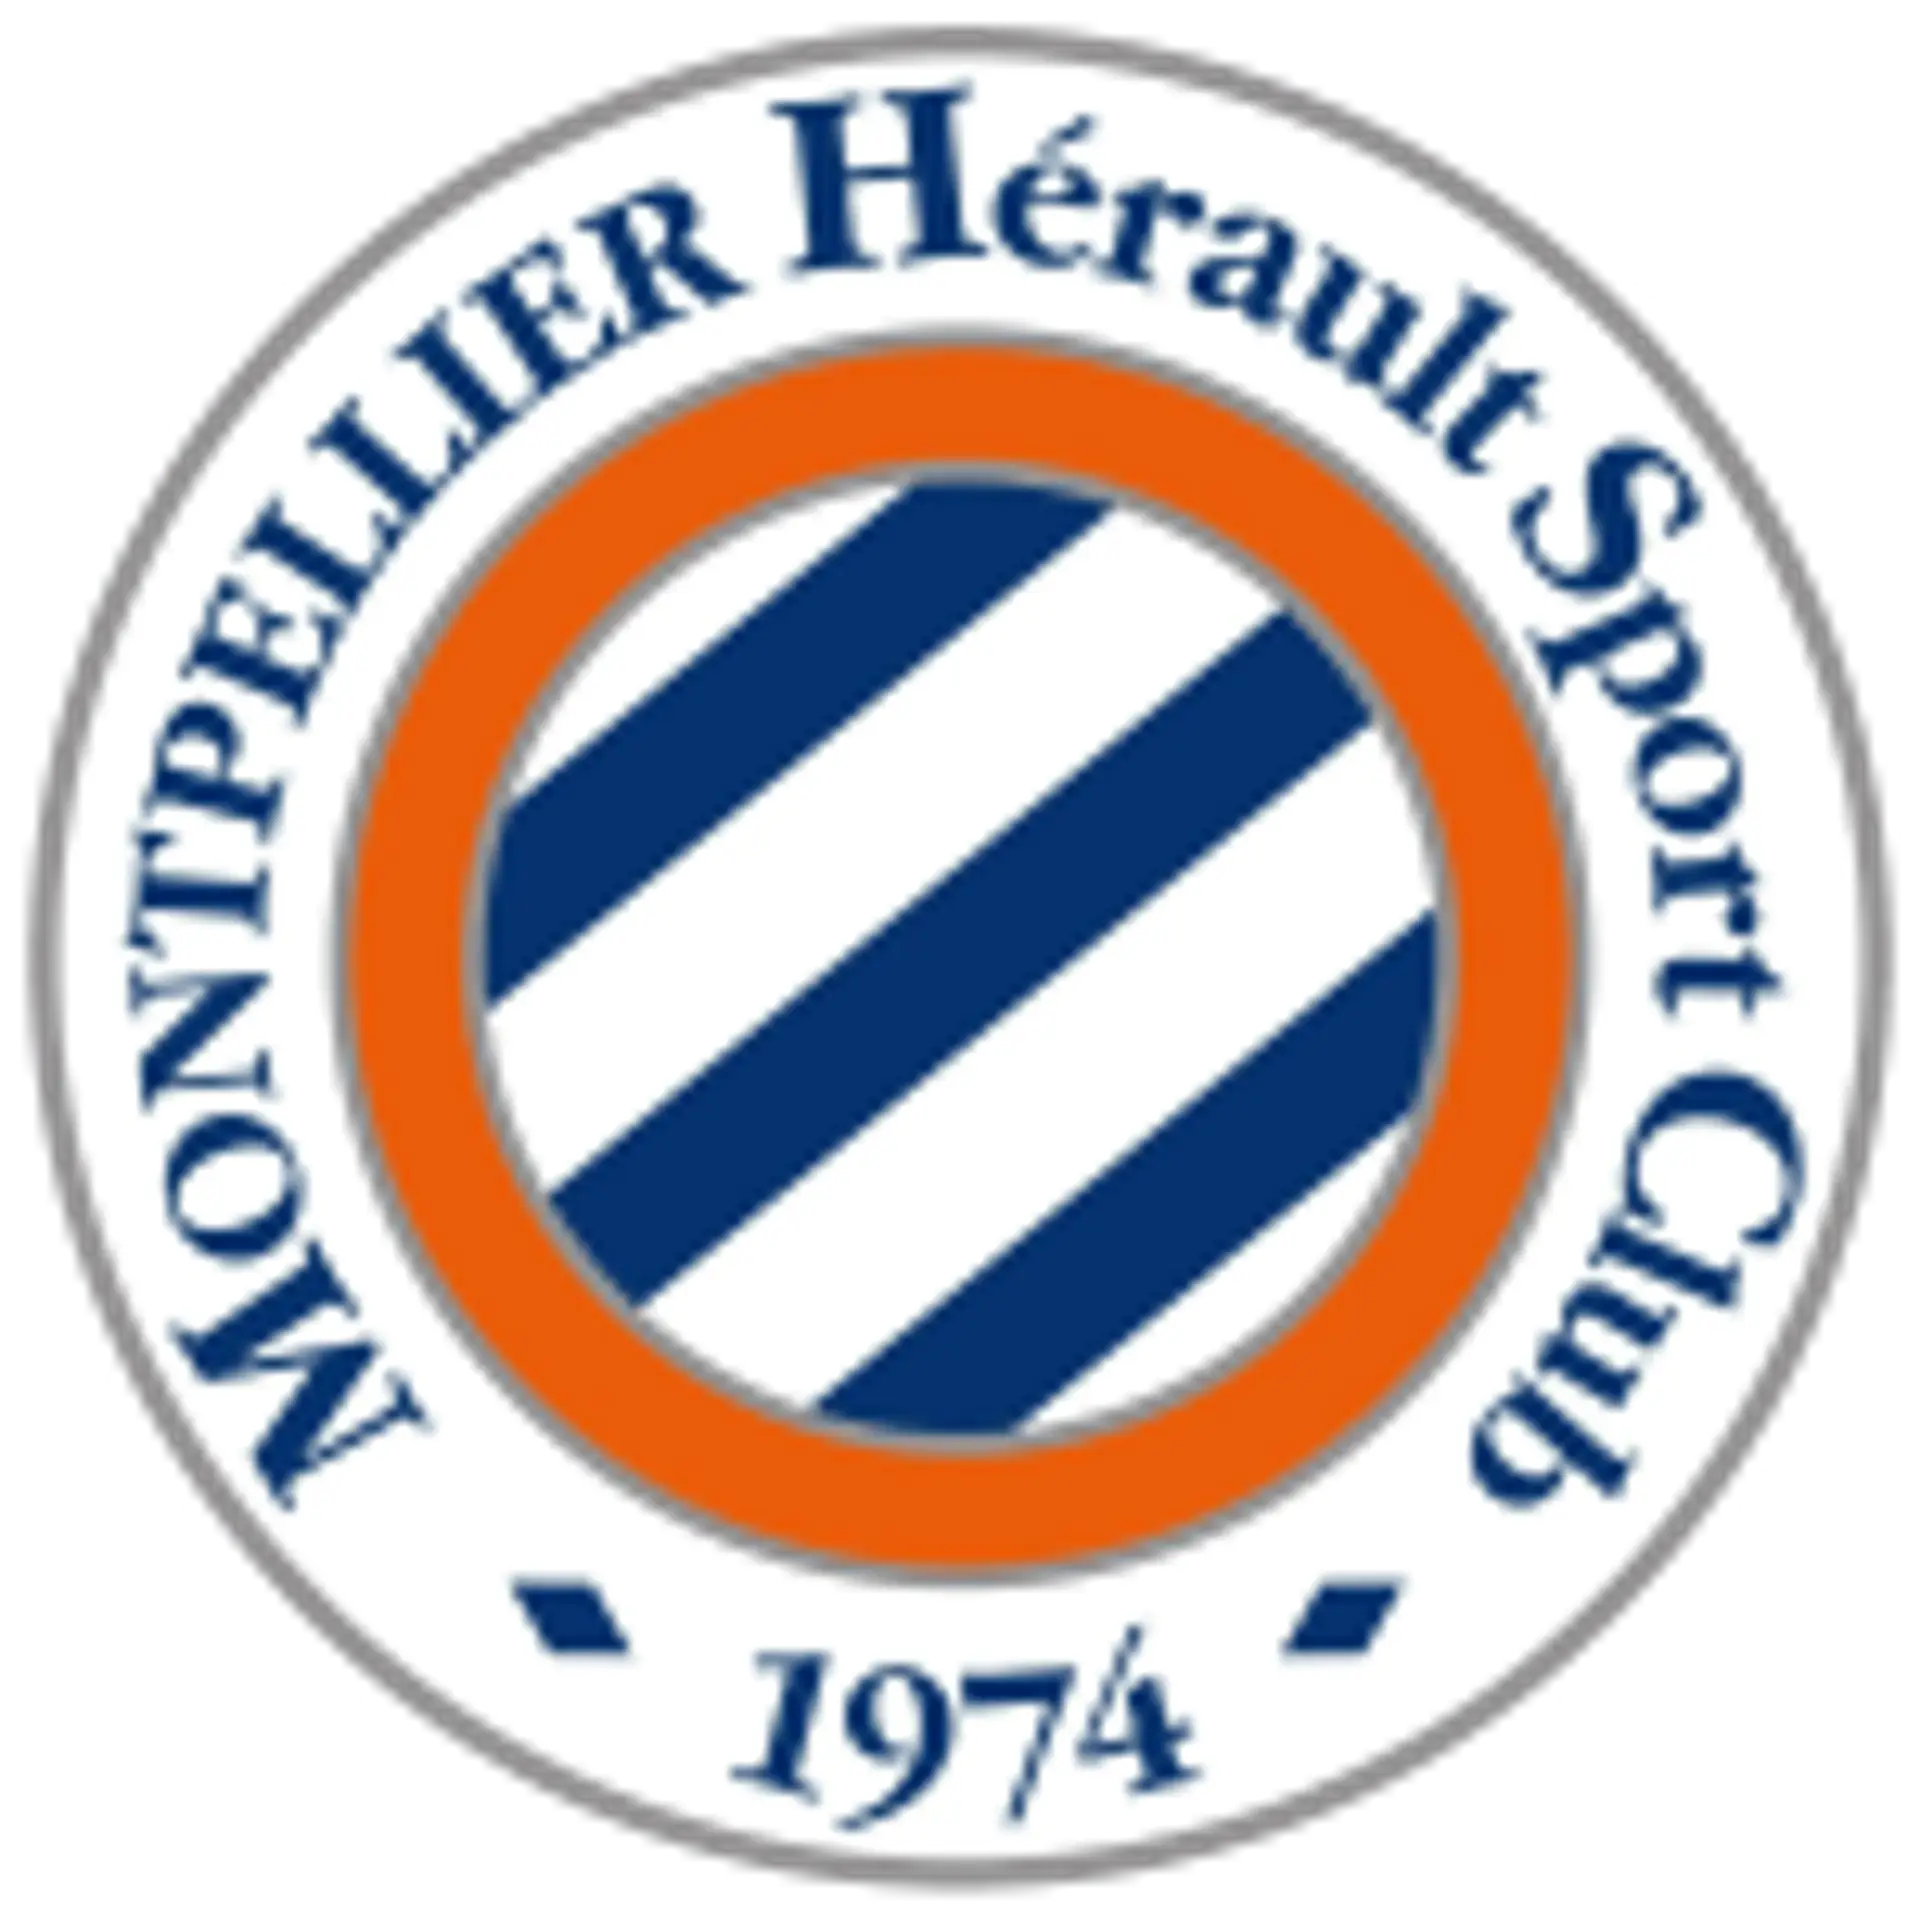 Montpellier vs PSG: Live Score, Stream and H2H results 2/1/2023. Preview  match Montpellier vs PSG, team, start time. 